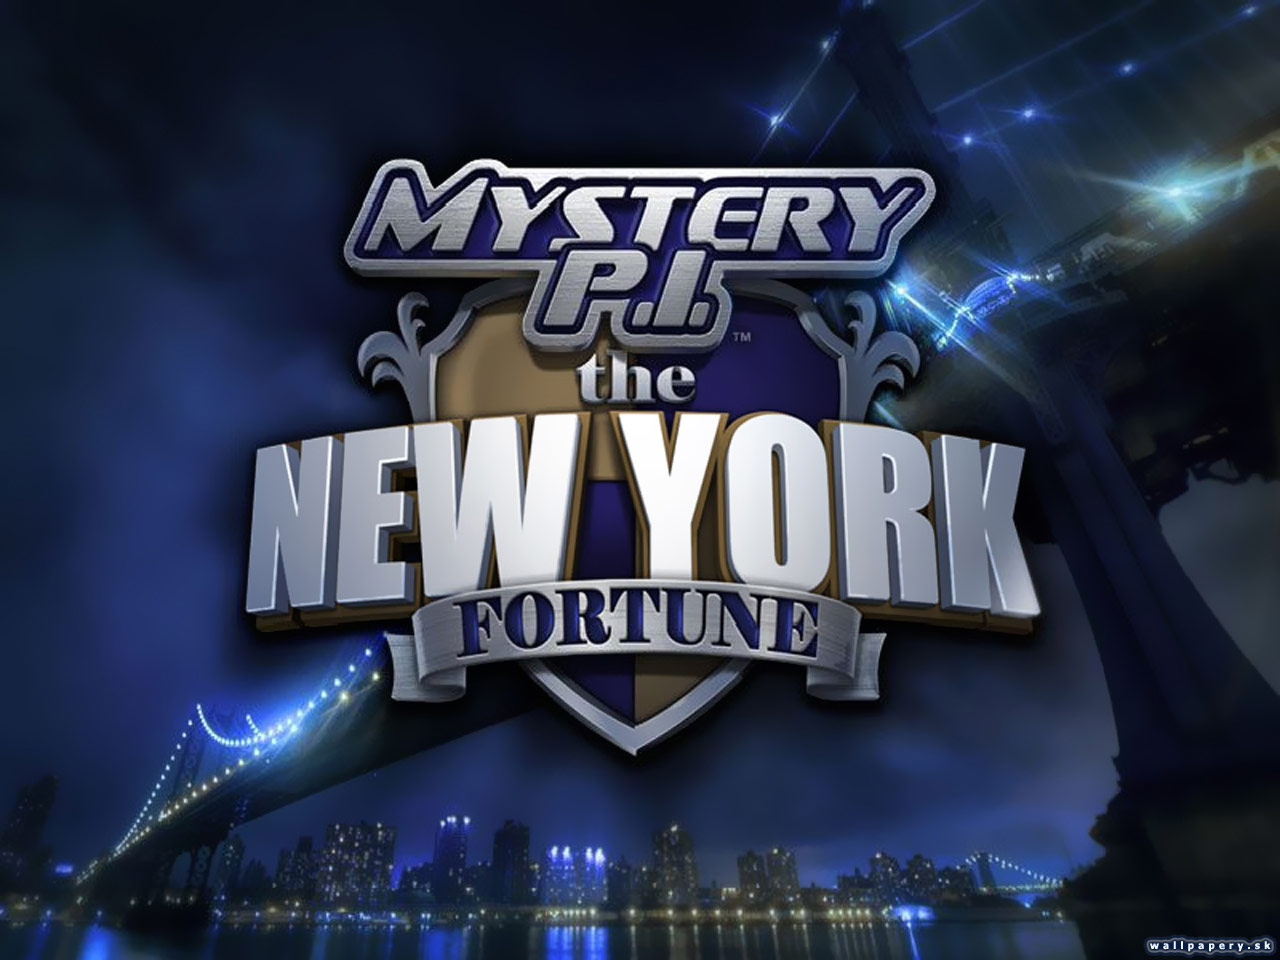 Mystery P.I. - The New York Fortune - wallpaper 1